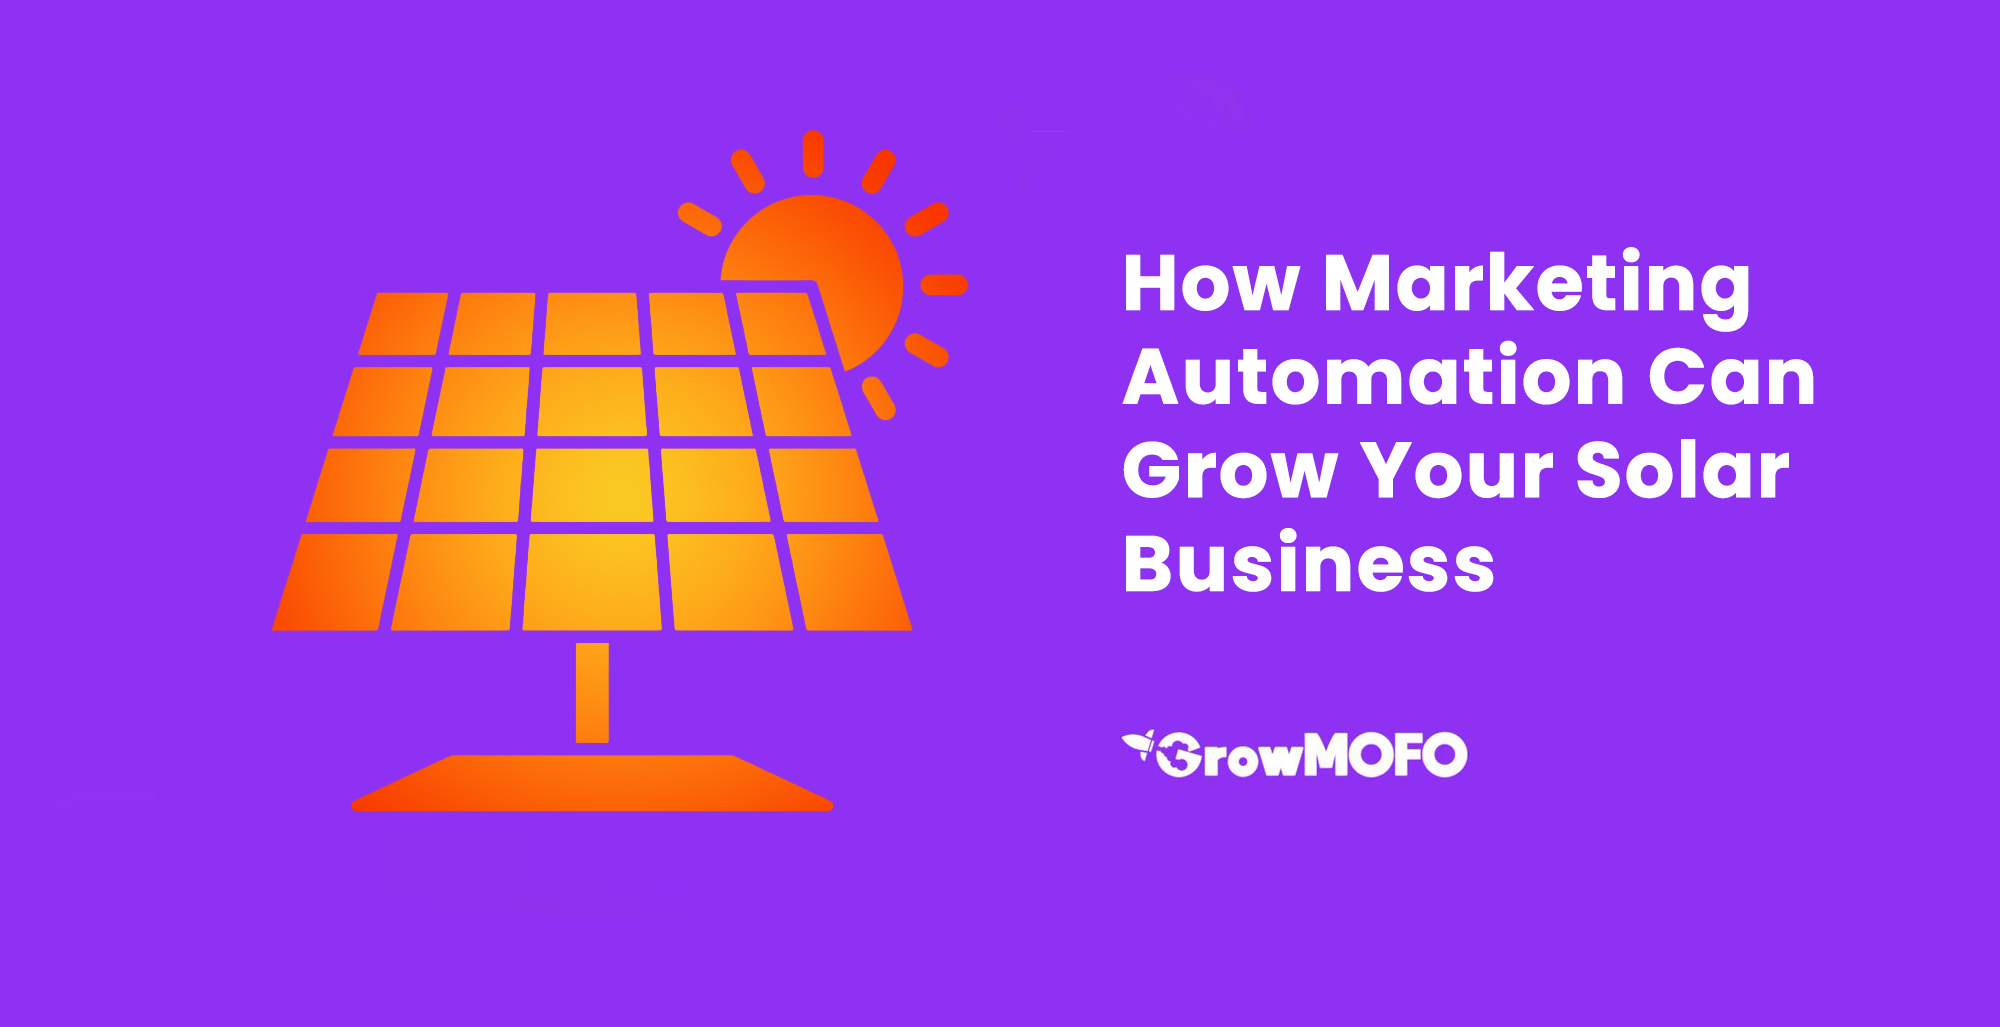 How Marketing Automation Can Grow Your Solar Business